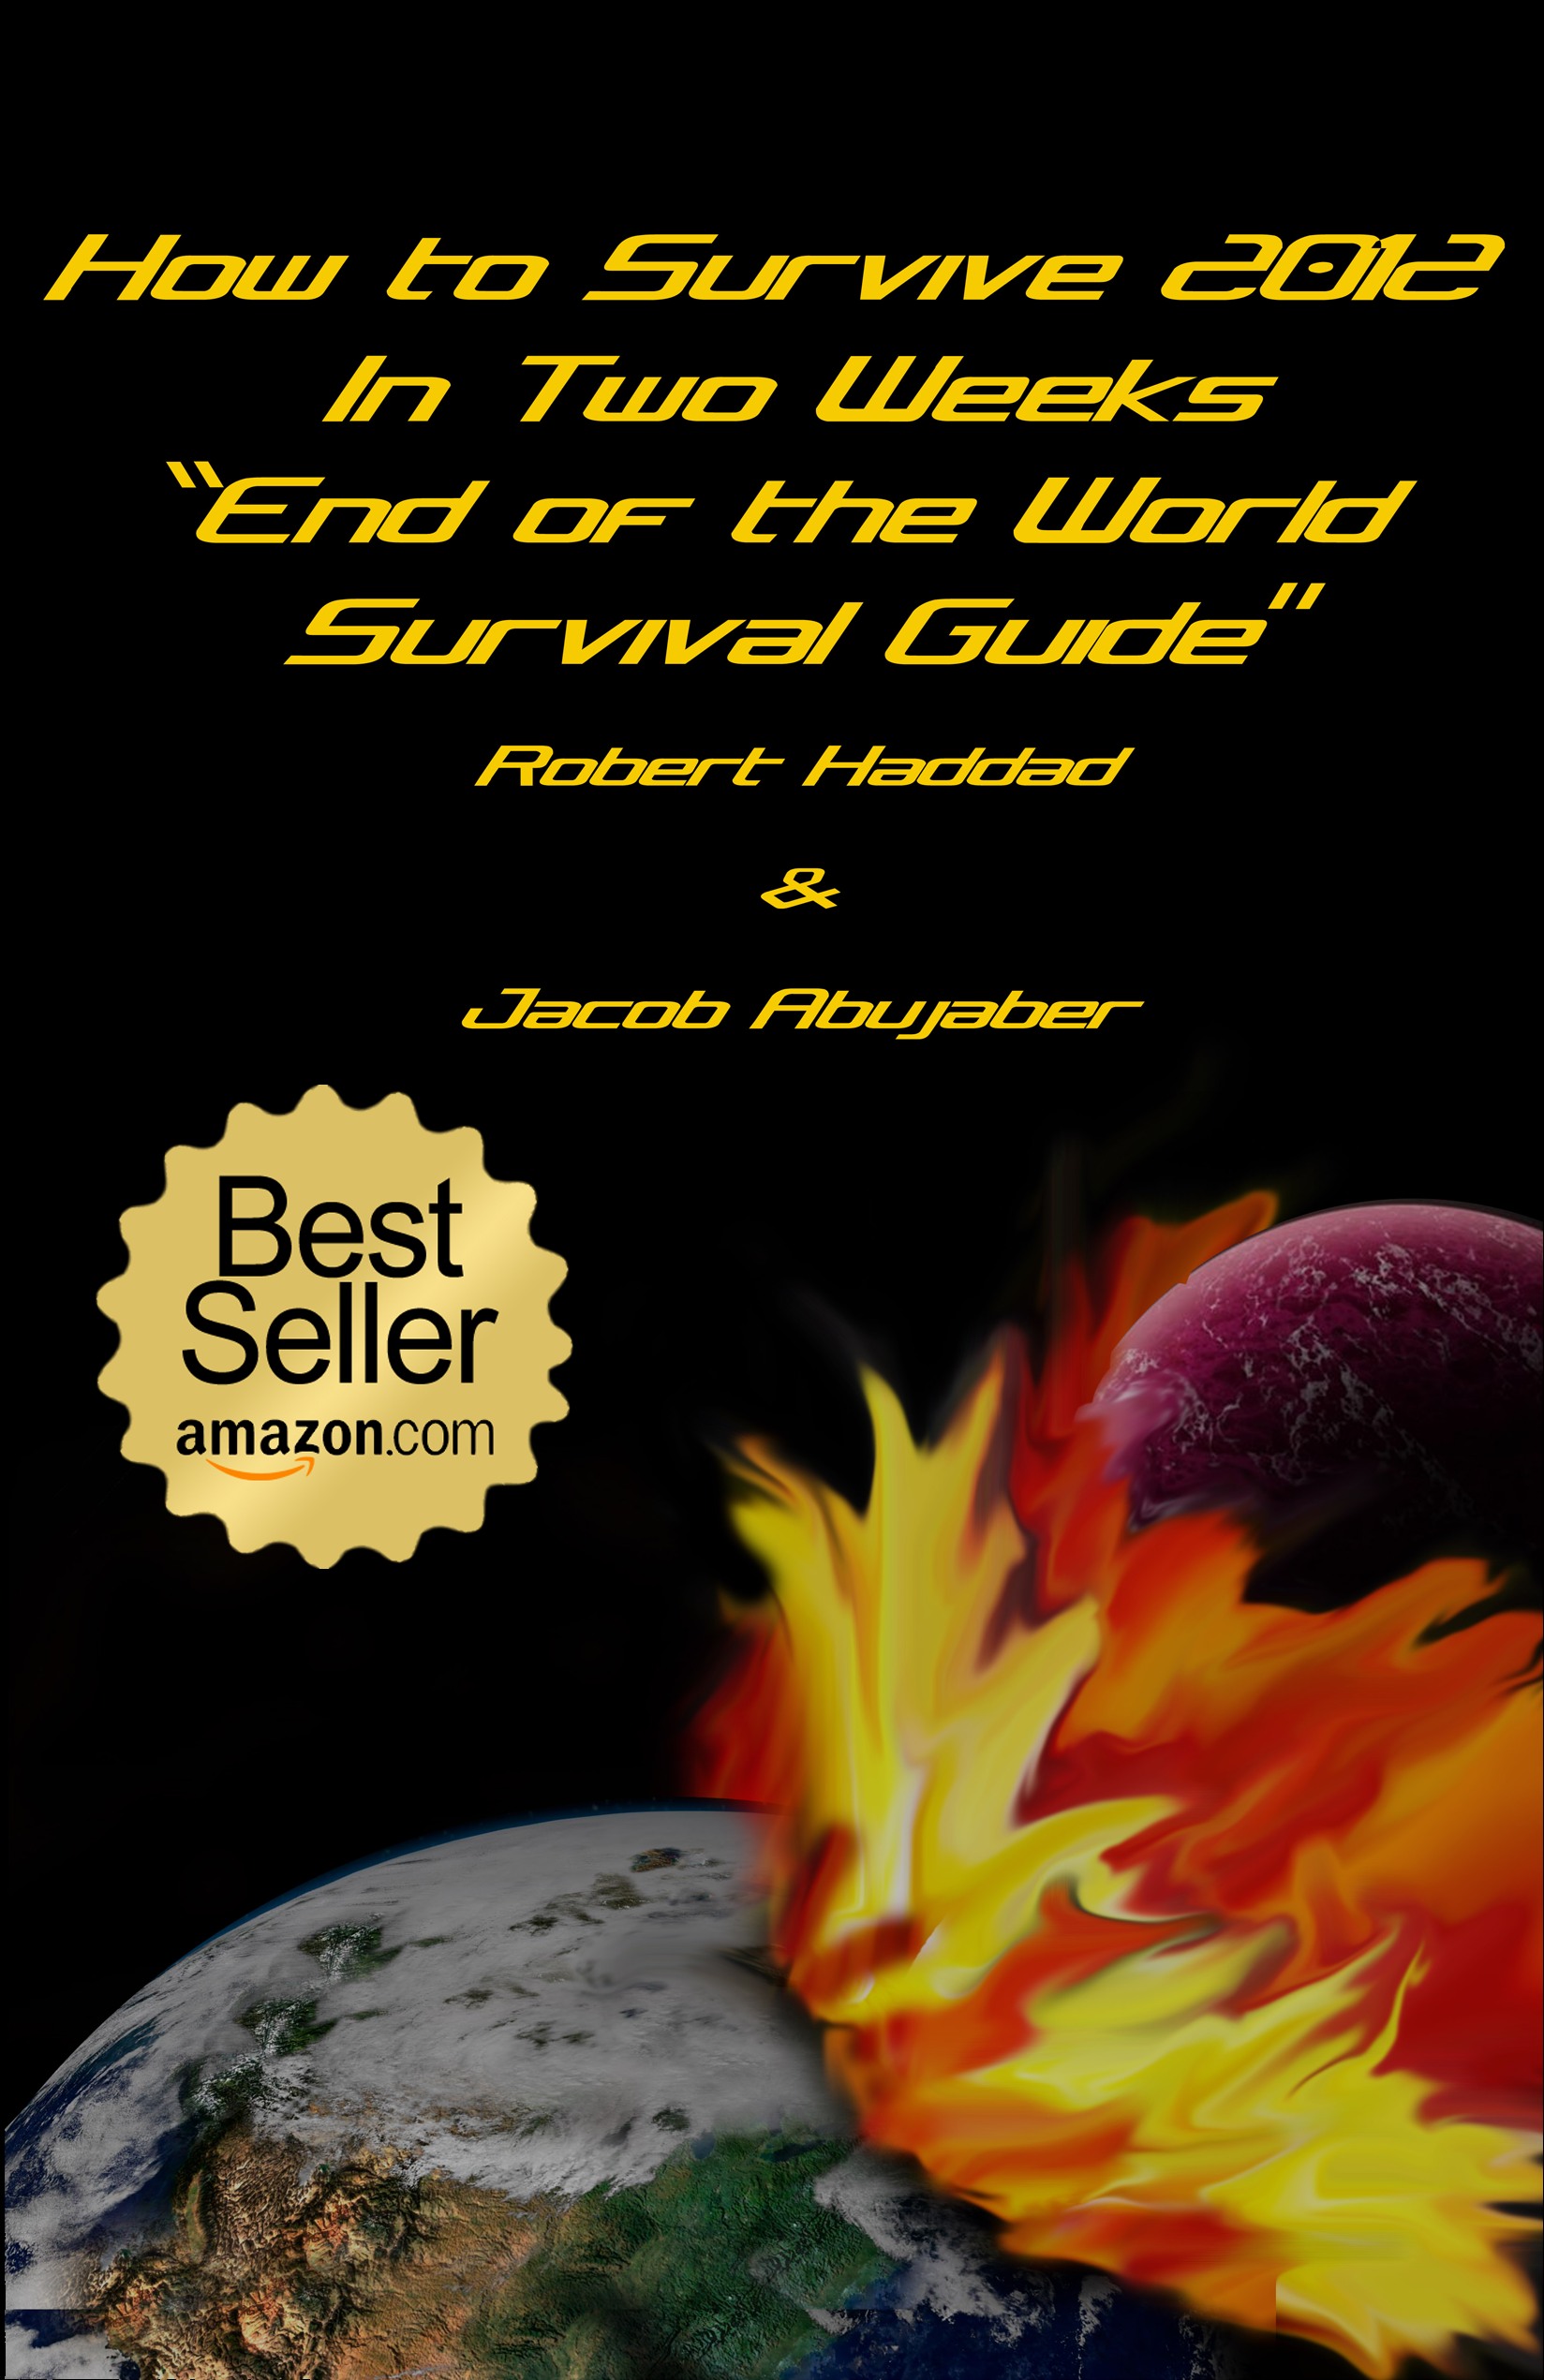 How to Survive 2012  In Two Weeks: End of the World Survival Guide